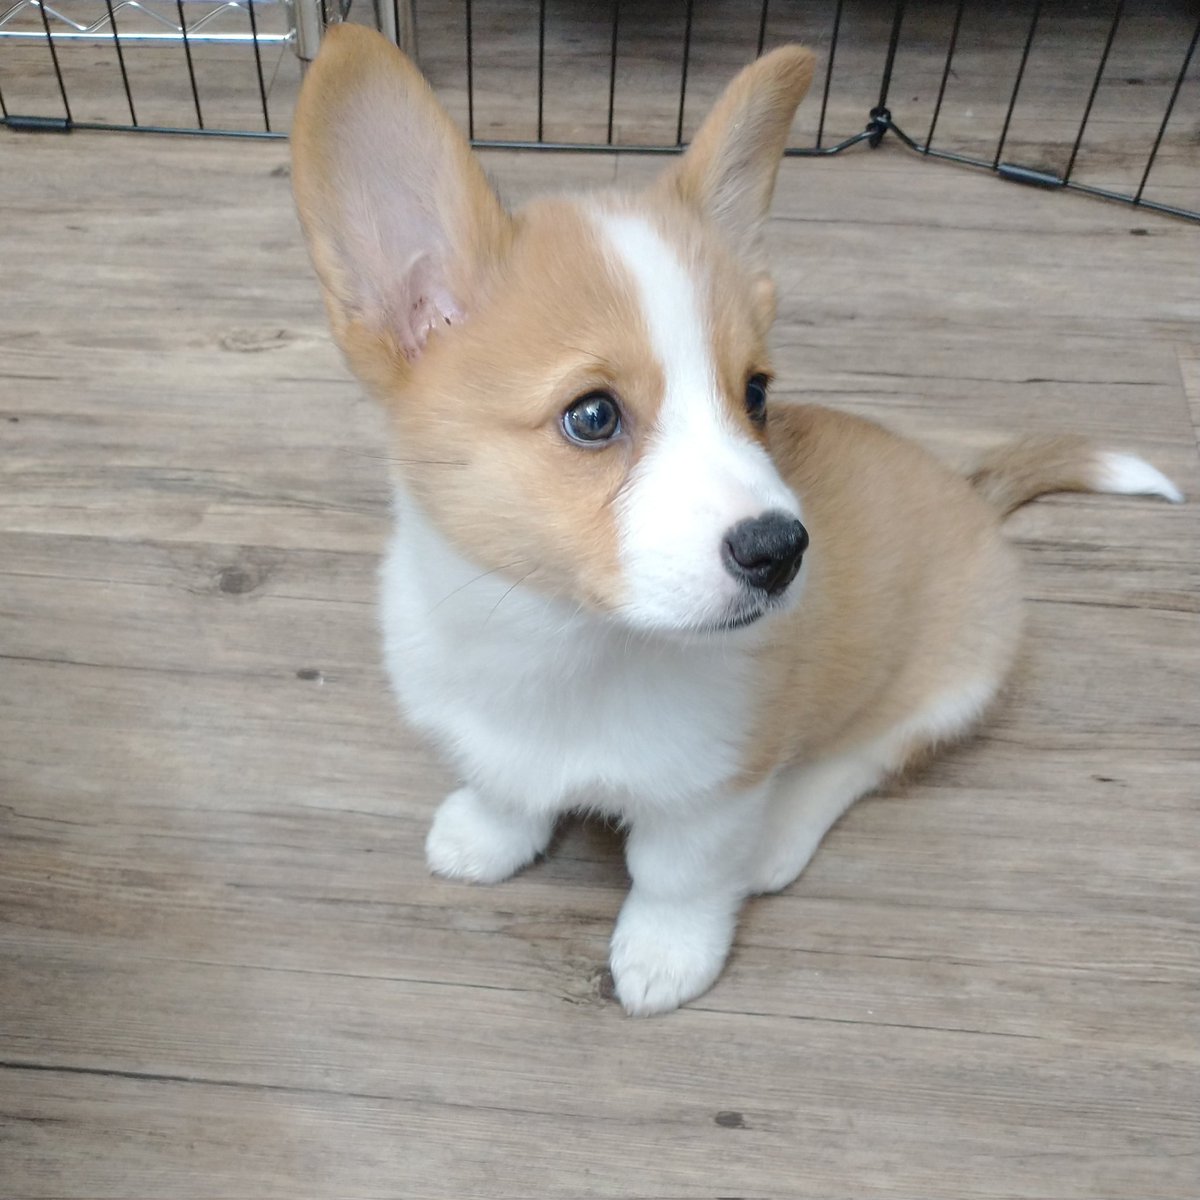 Hey @Caltrain, I had to get a car just so I can get my Corgi puppy to work with me. Why not allow dogs on Caltrain? Require carriers, or designate a dog cart. But why a blanket ban? This puppy would love to ride on your trains.